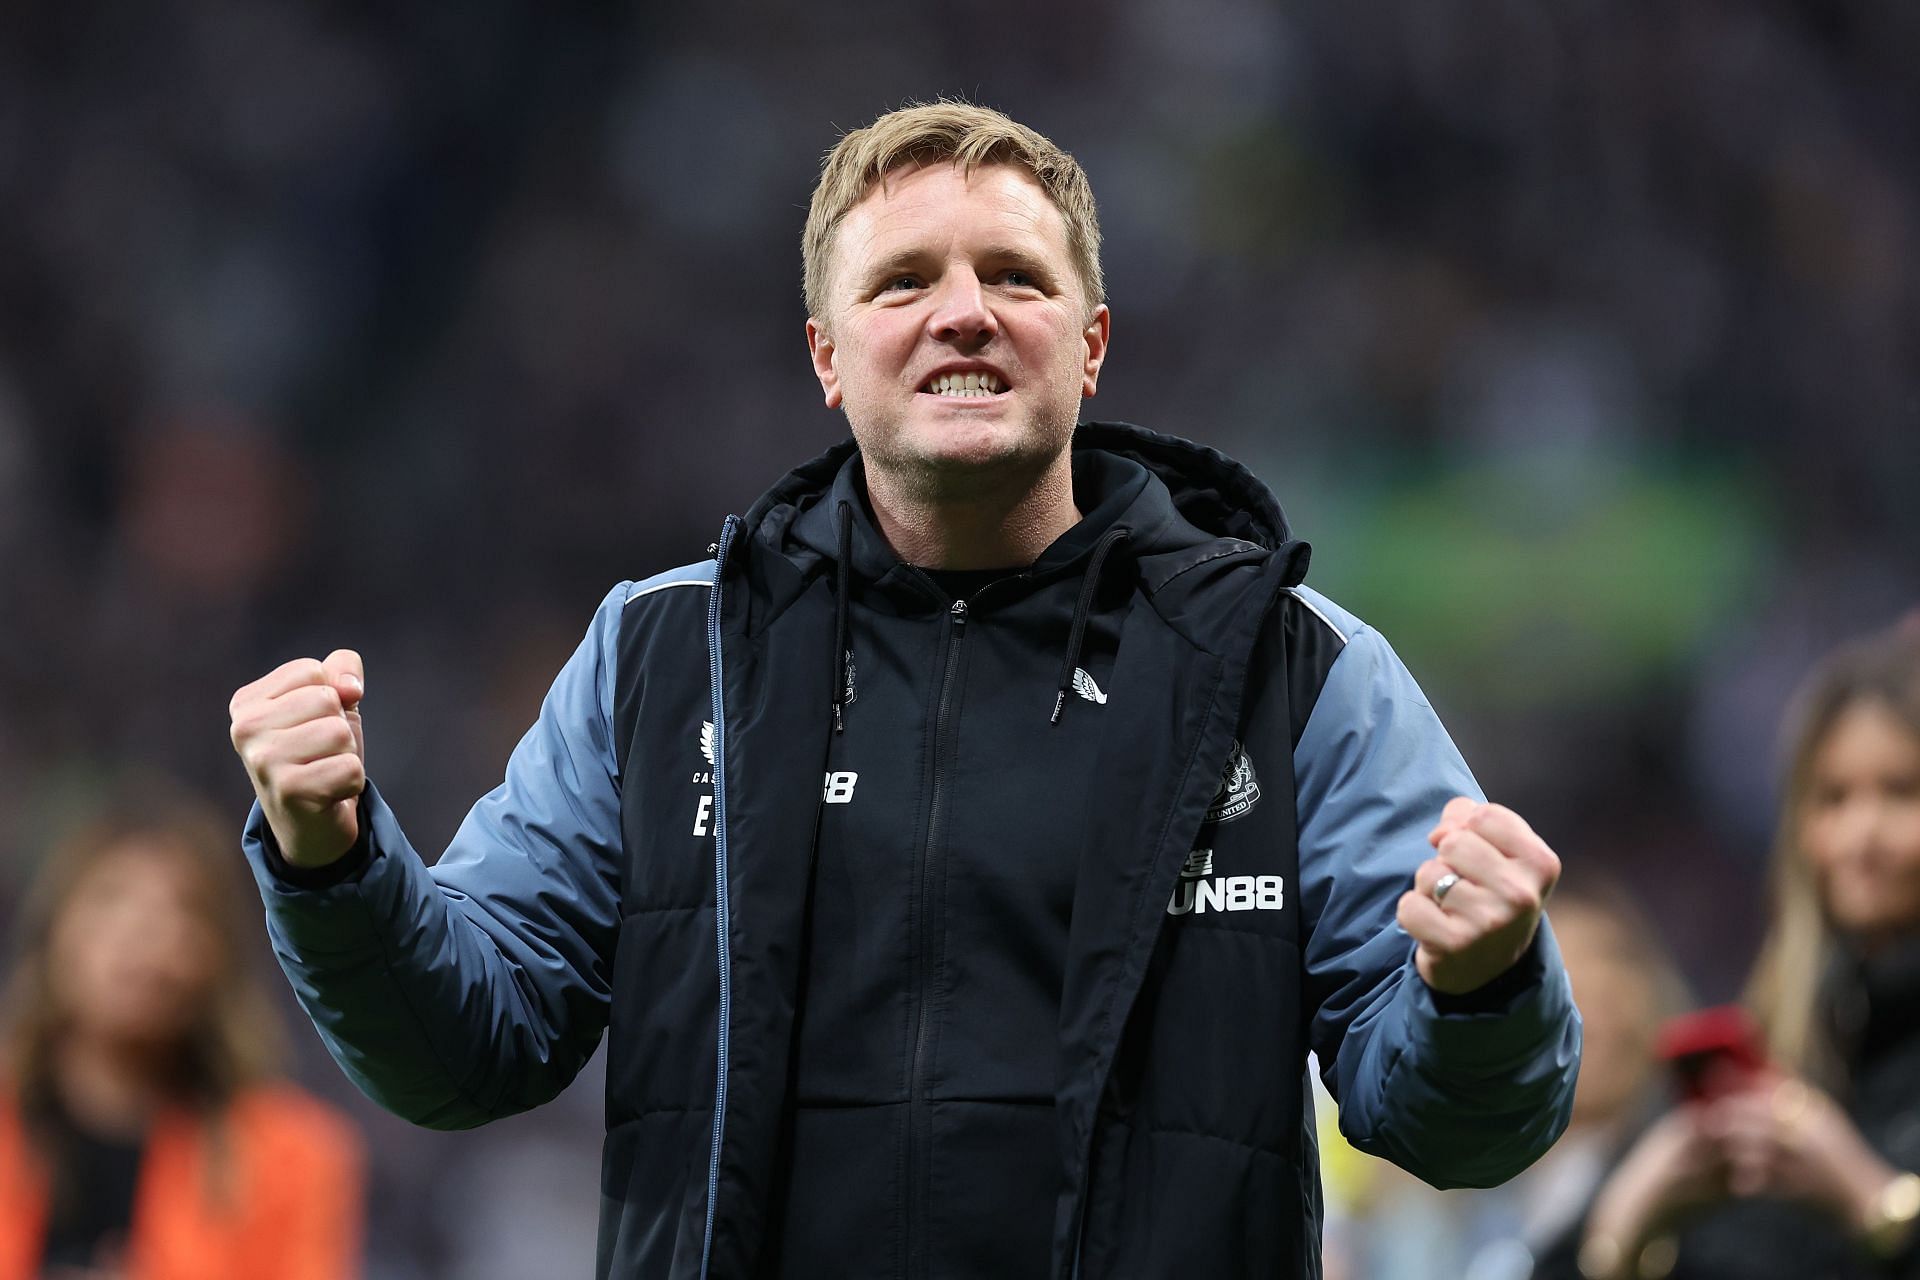 Eddie Howe shot down rumors of a move for the Manchester United legend.